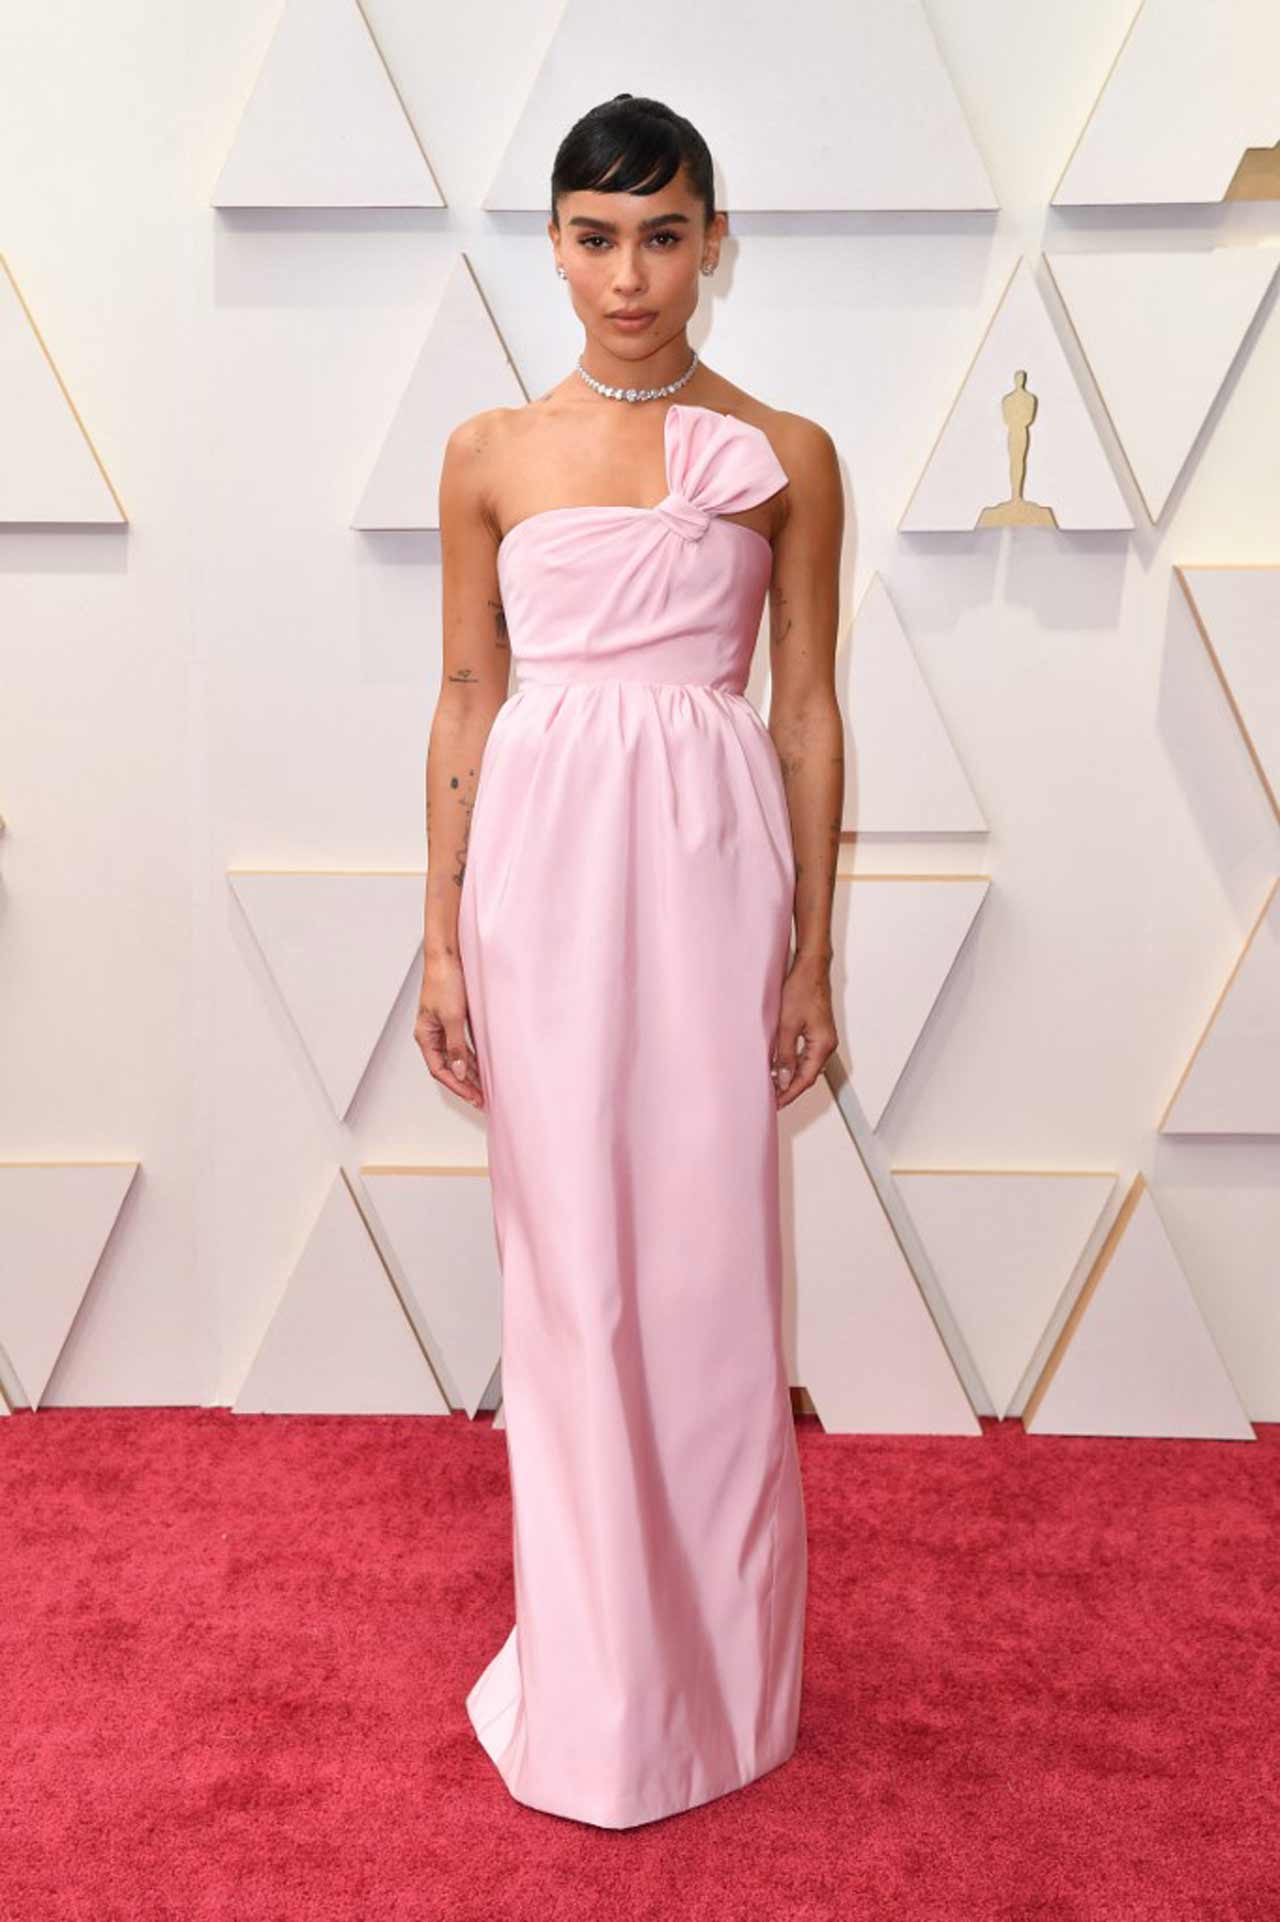 Zoe Kravitz, The 'Batman' star kept things simple and beautiful with a pastel pink floor-length Saint Laurent dress. Complimenting her minimal look, she added a sparkling choker and stud earrings.